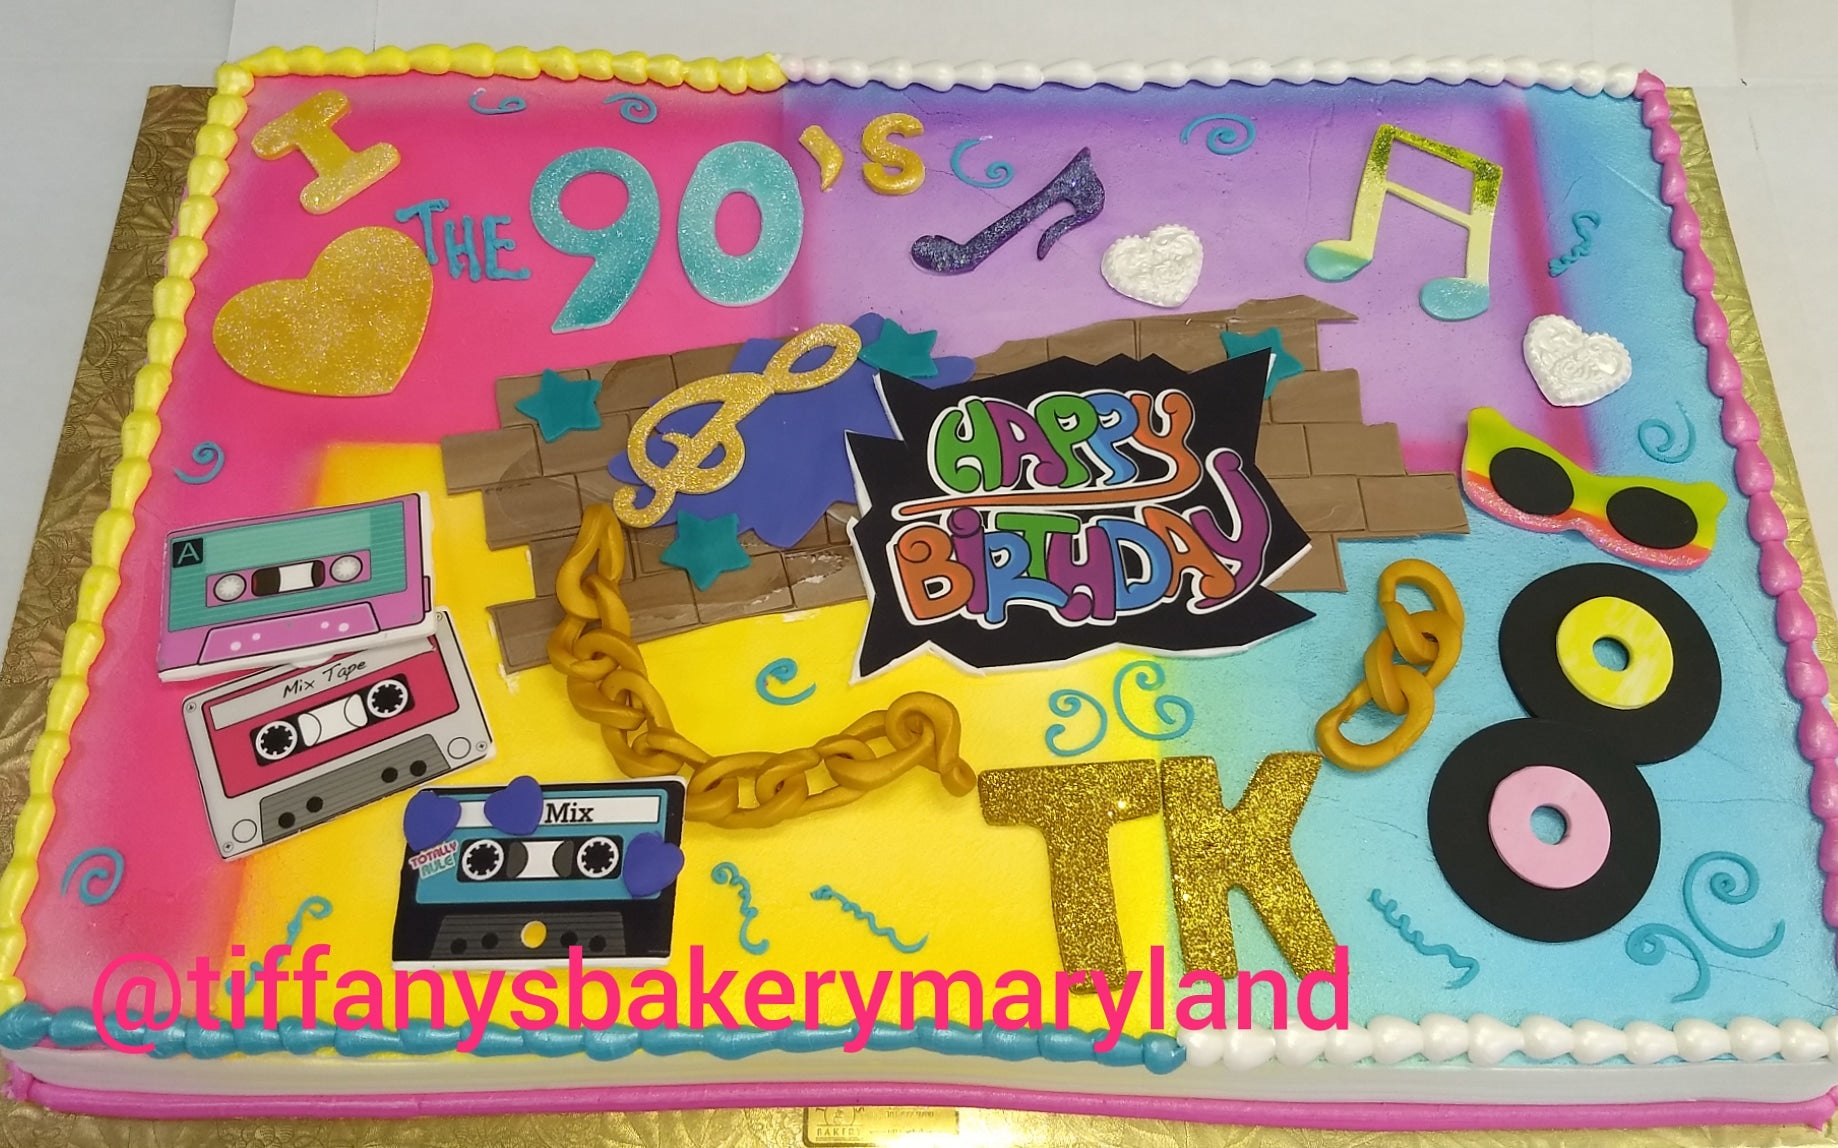 Blast from the Past Theme Sheet Cake - 80's and 90's remembered – Tiffany's Bakery